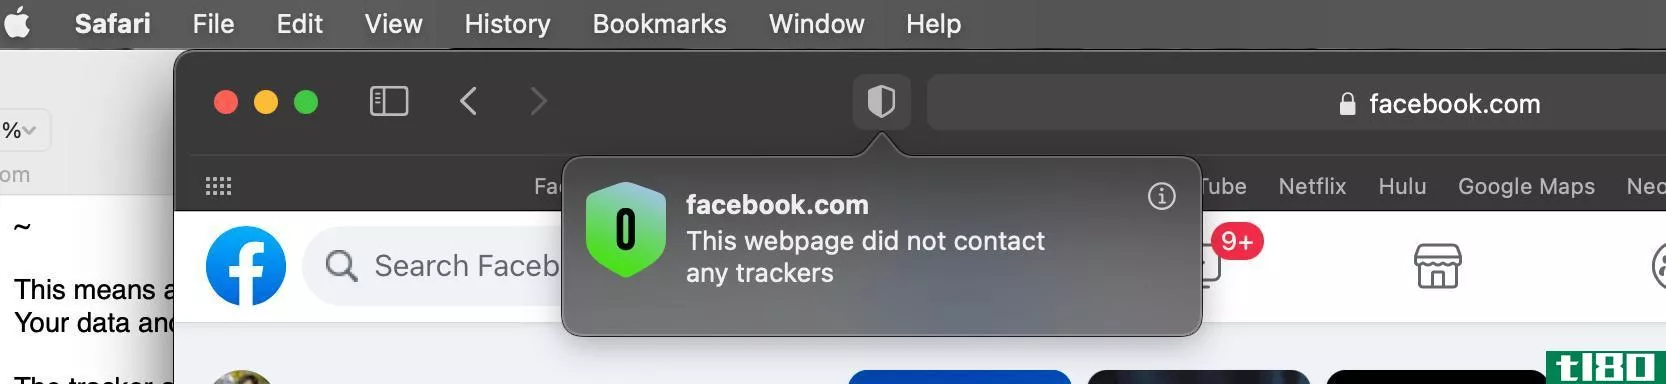 View of the privacy report icon selected while in Safari - 0 trackers detected